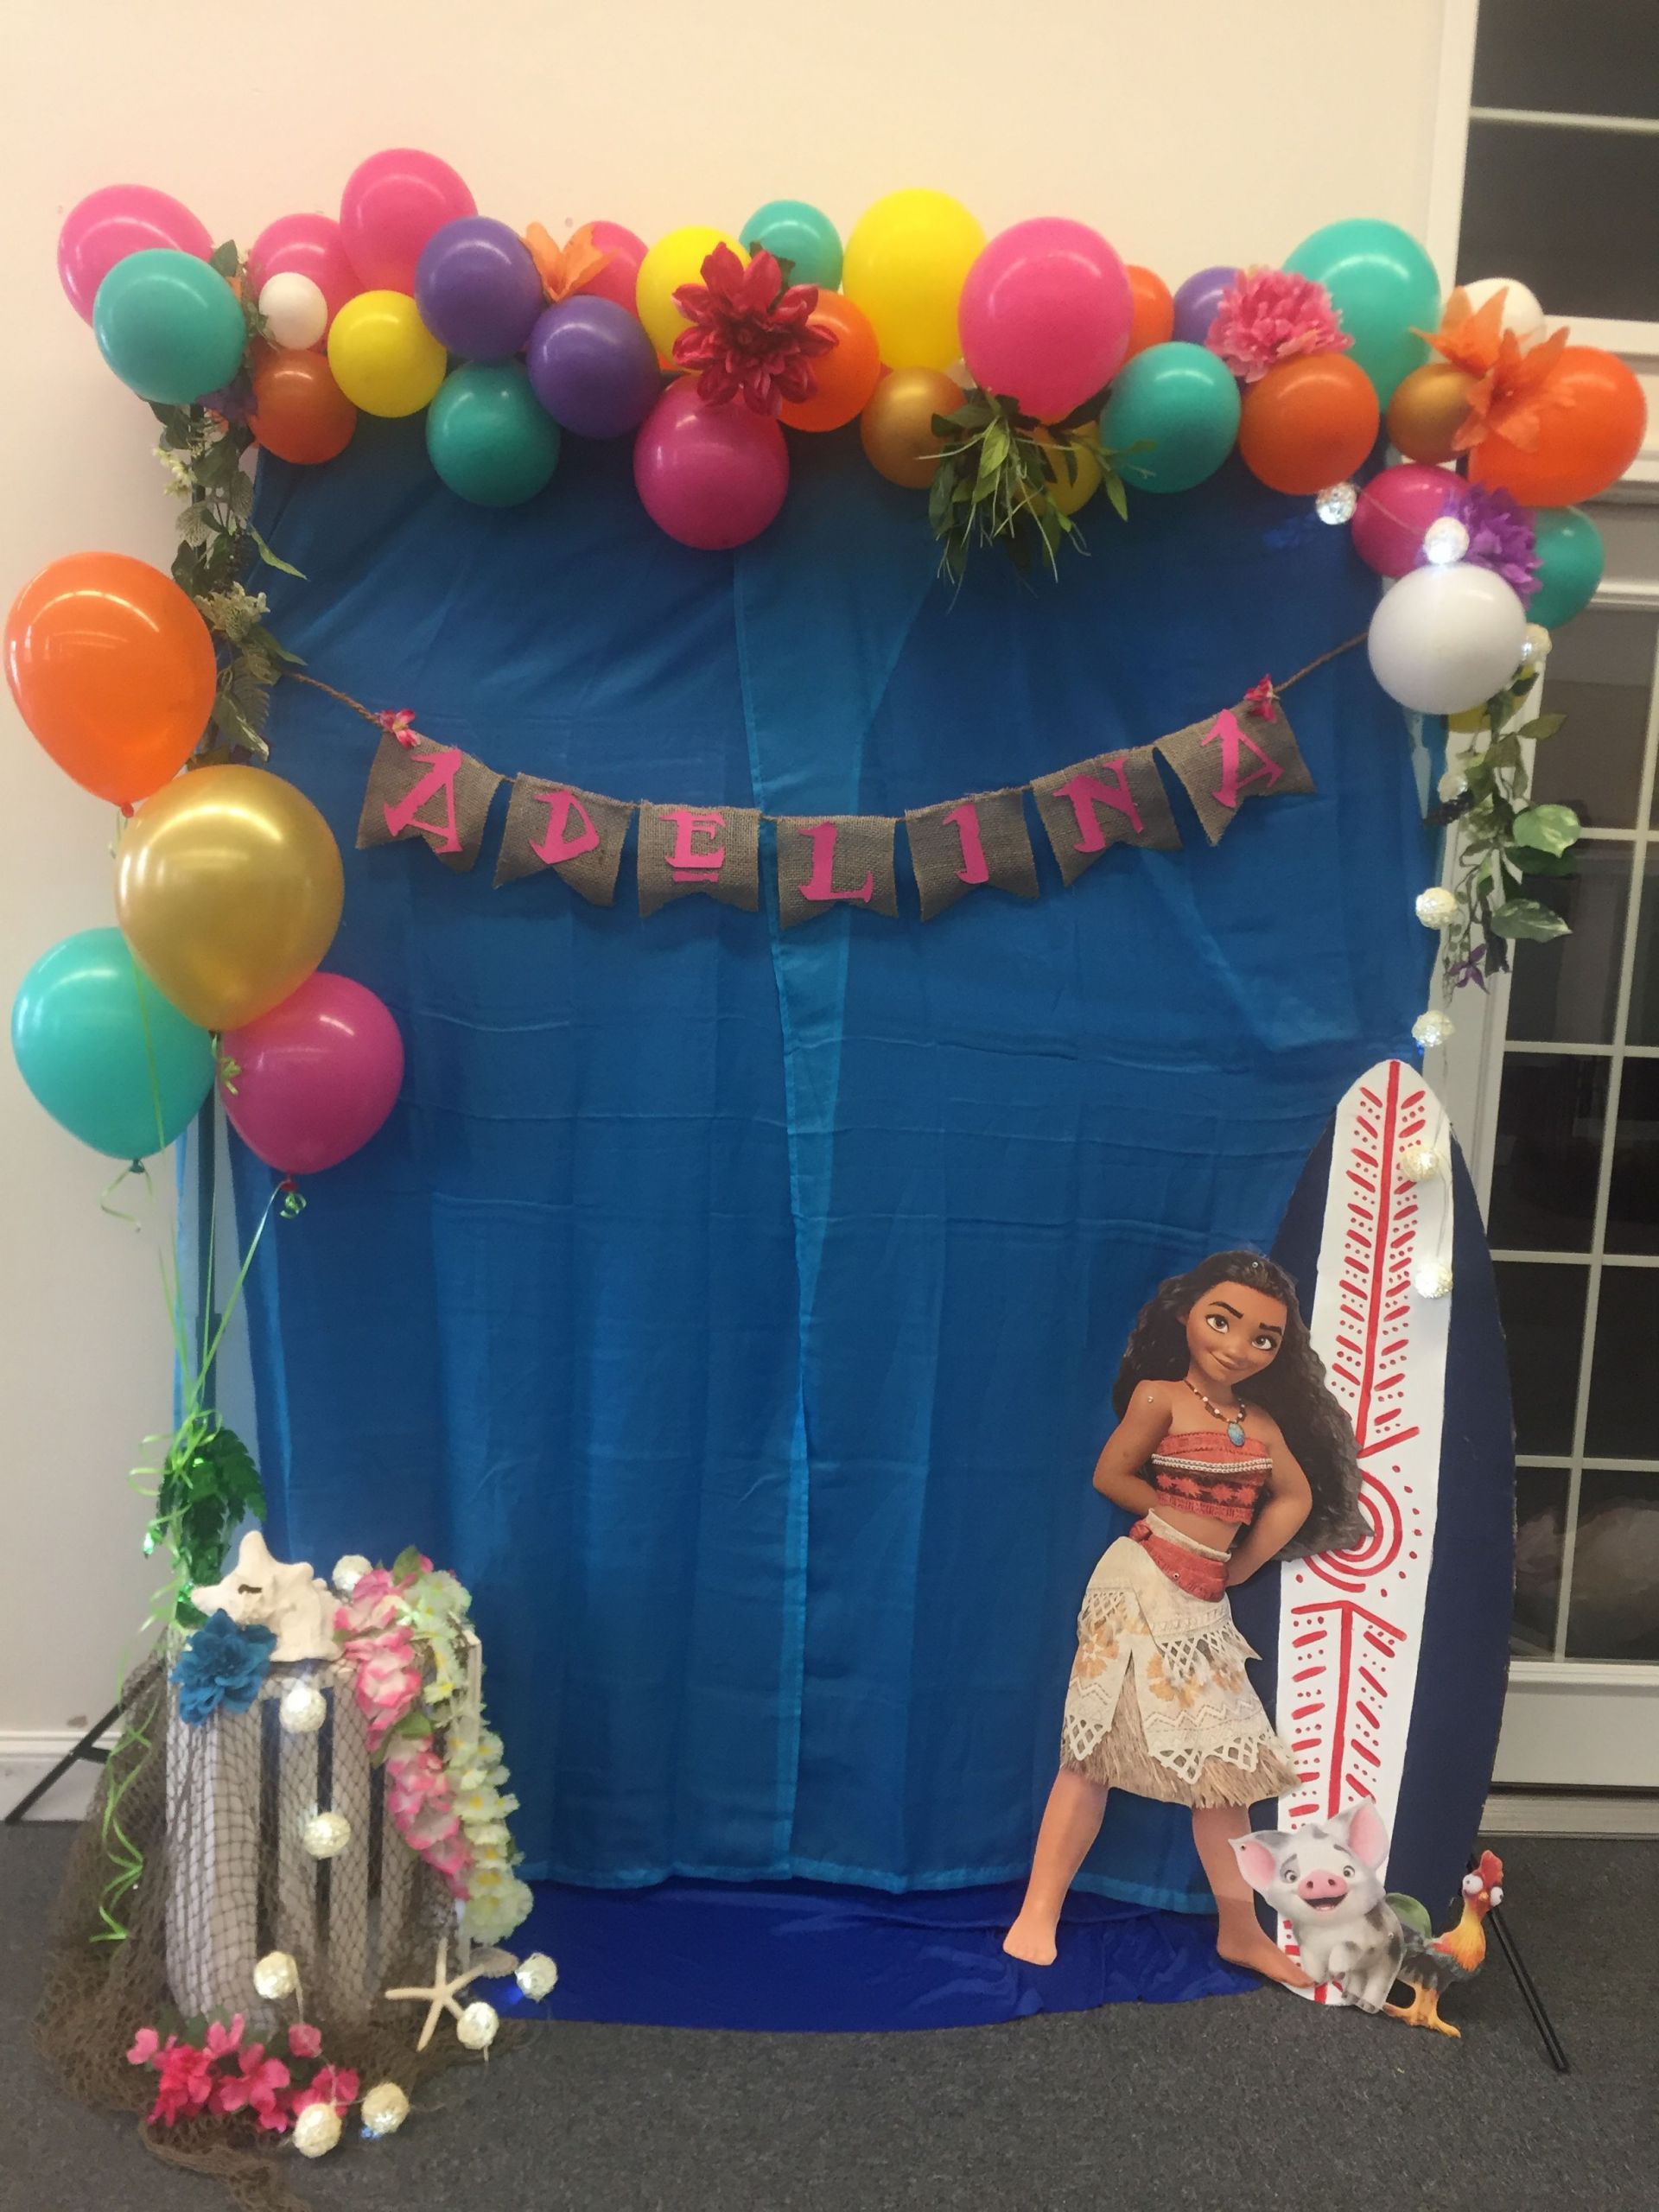 Photo Booth Ideas For Birthday Party
 Moana Birthday Party Booth